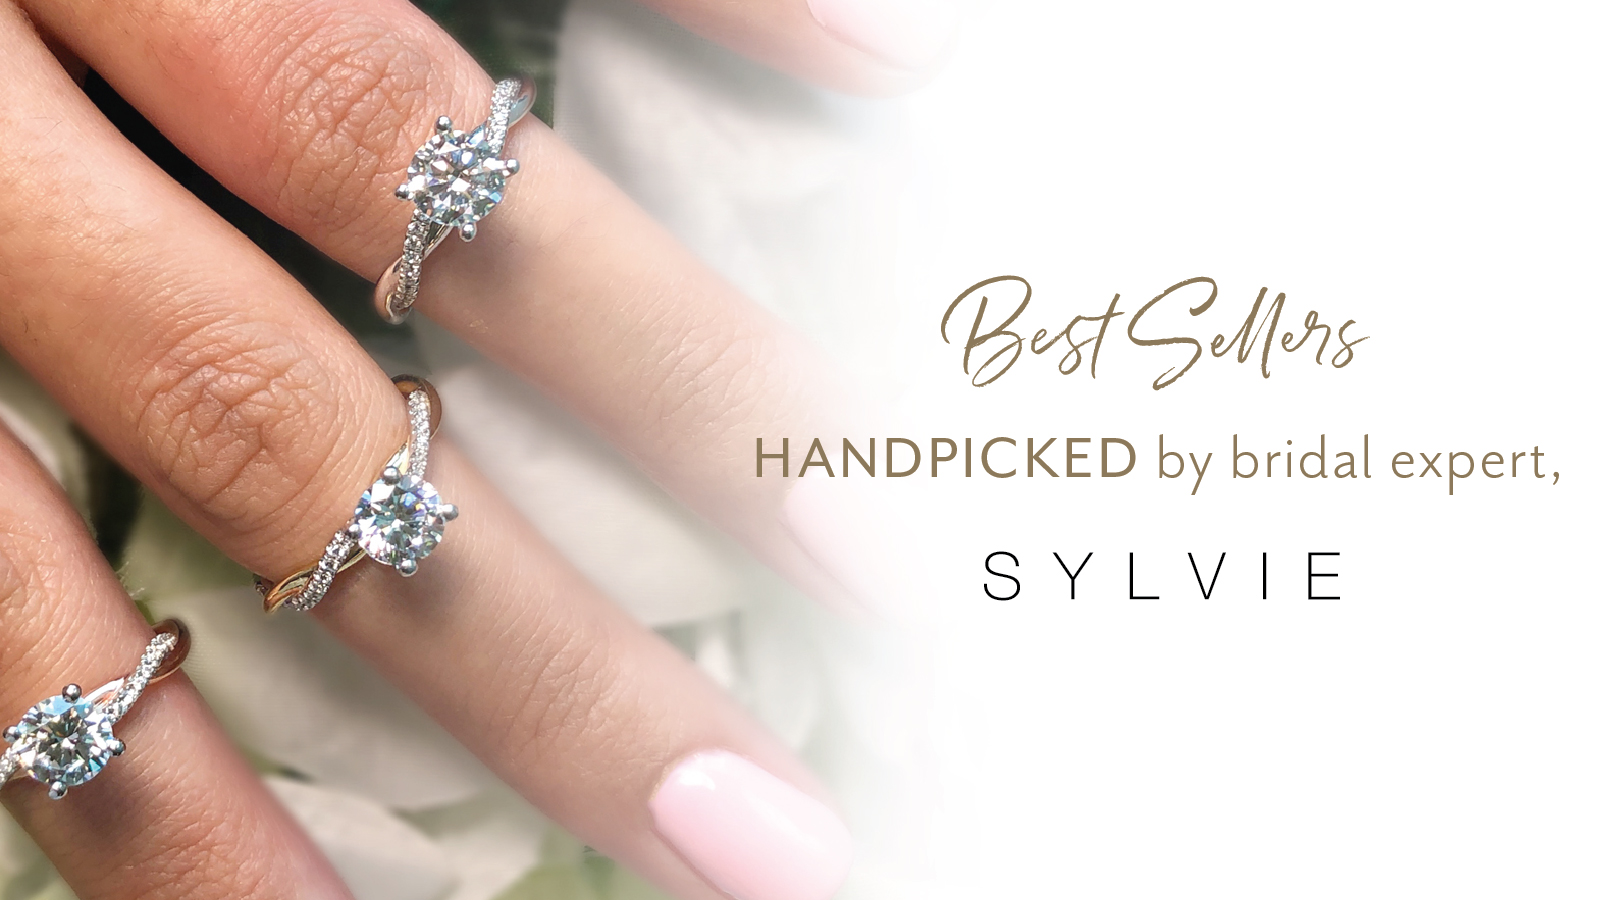 Best selling engagement rings